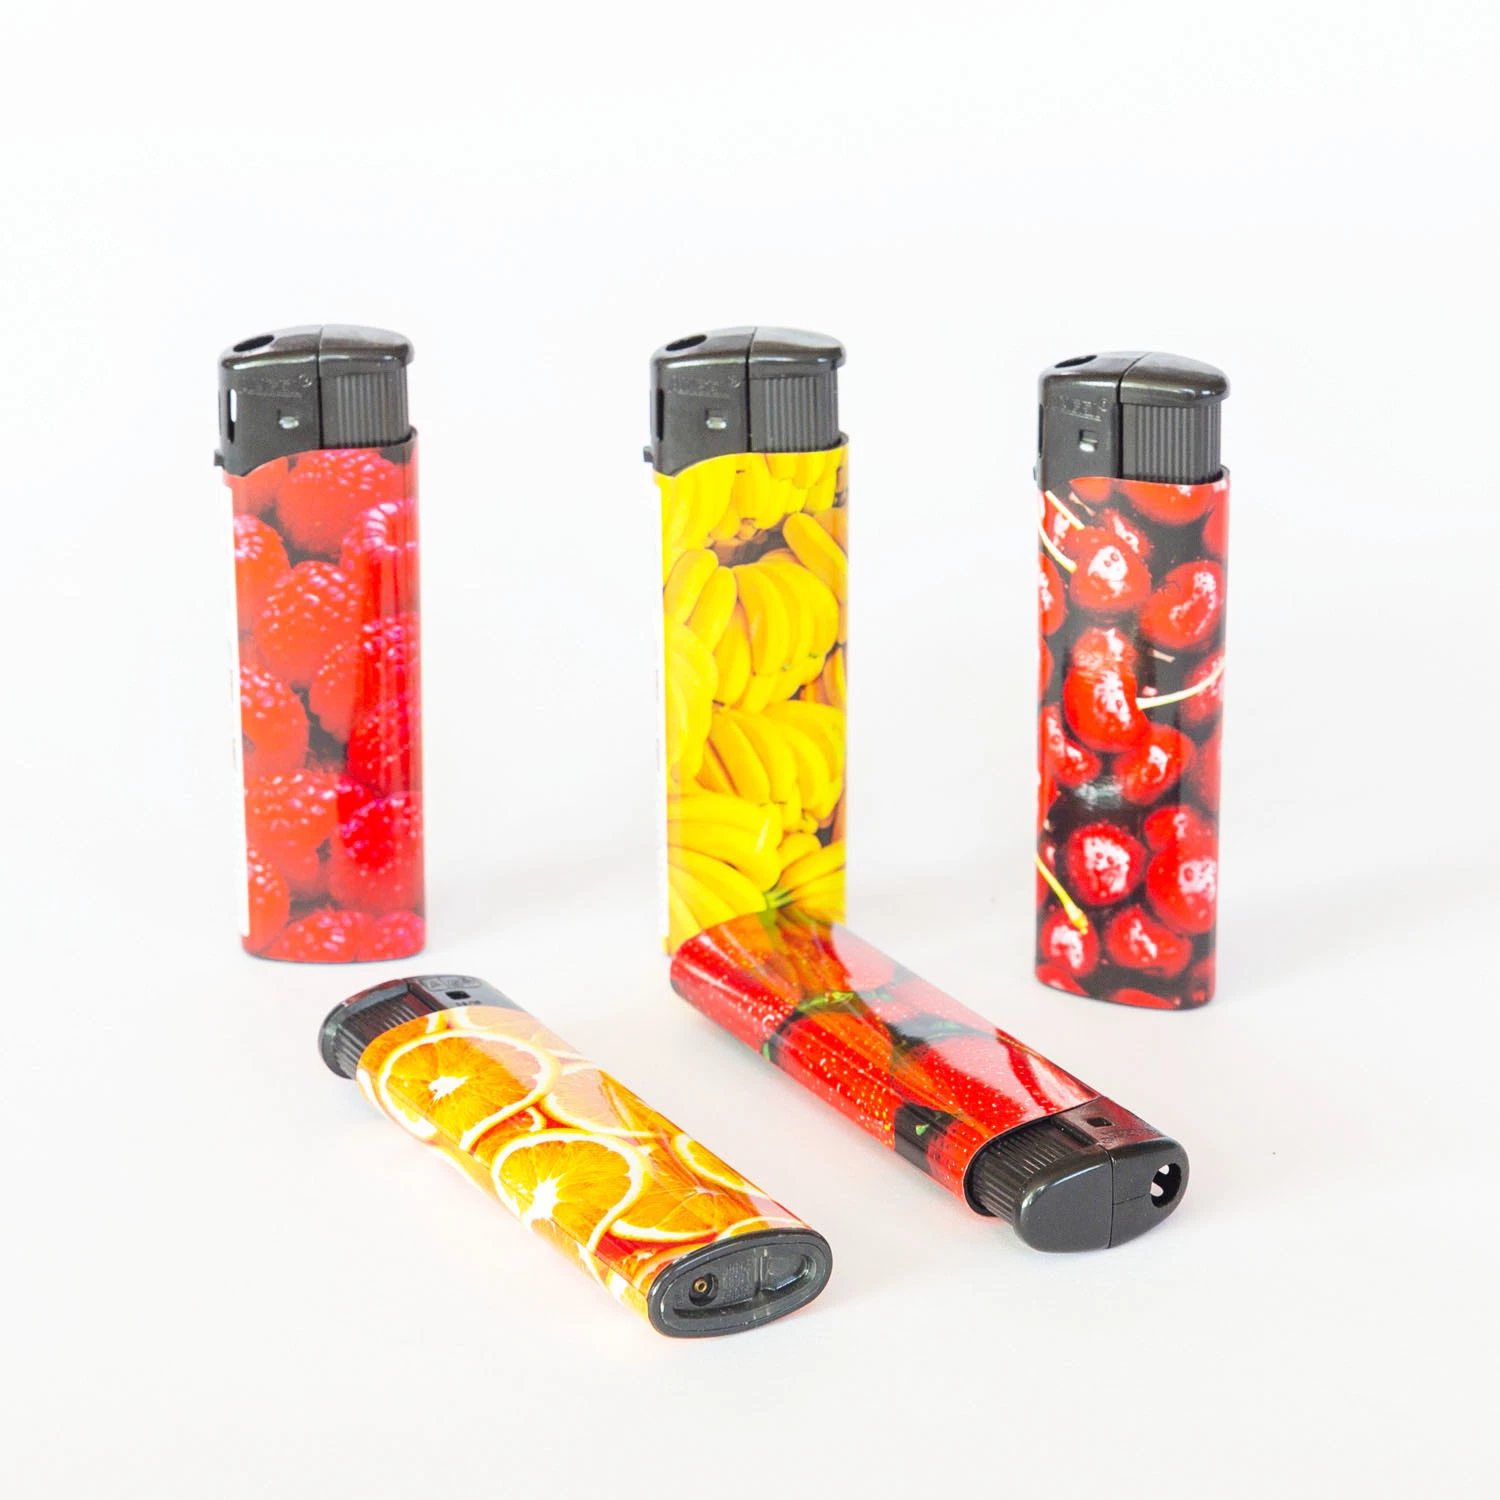 New Arrival/Top-Ranking Lighter Suppliers Electronic Refillable Plastic Lighter Disposable Gas Lighter with label. Sticker Cr Lighter